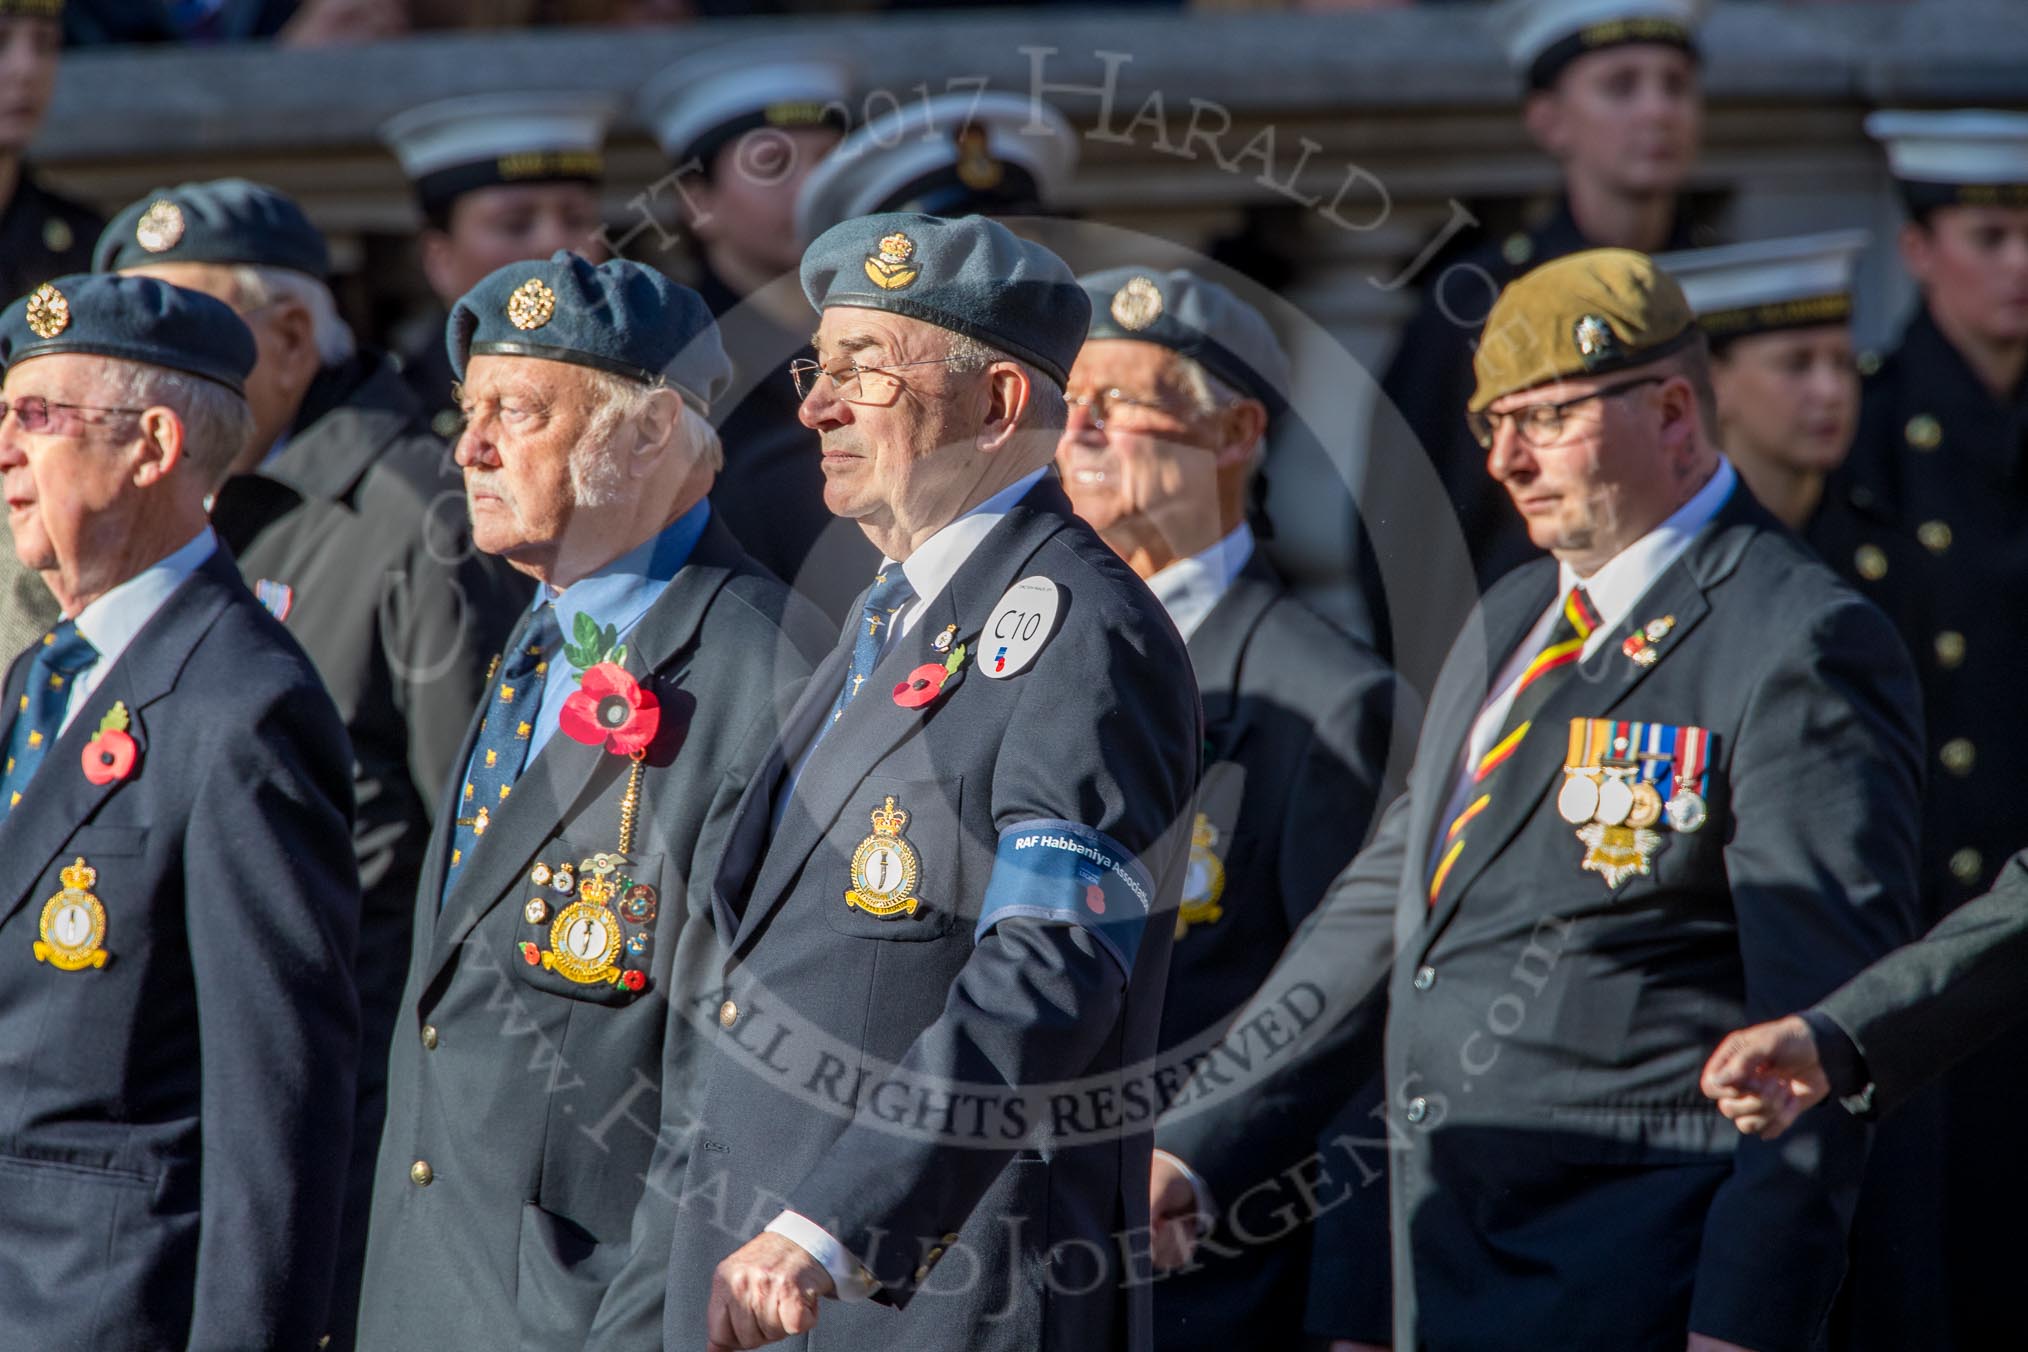 RAF Habbaniya Association (Group C10, 14 members) during the Royal British Legion March Past on Remembrance Sunday at the Cenotaph, Whitehall, Westminster, London, 11 November 2018, 12:16.